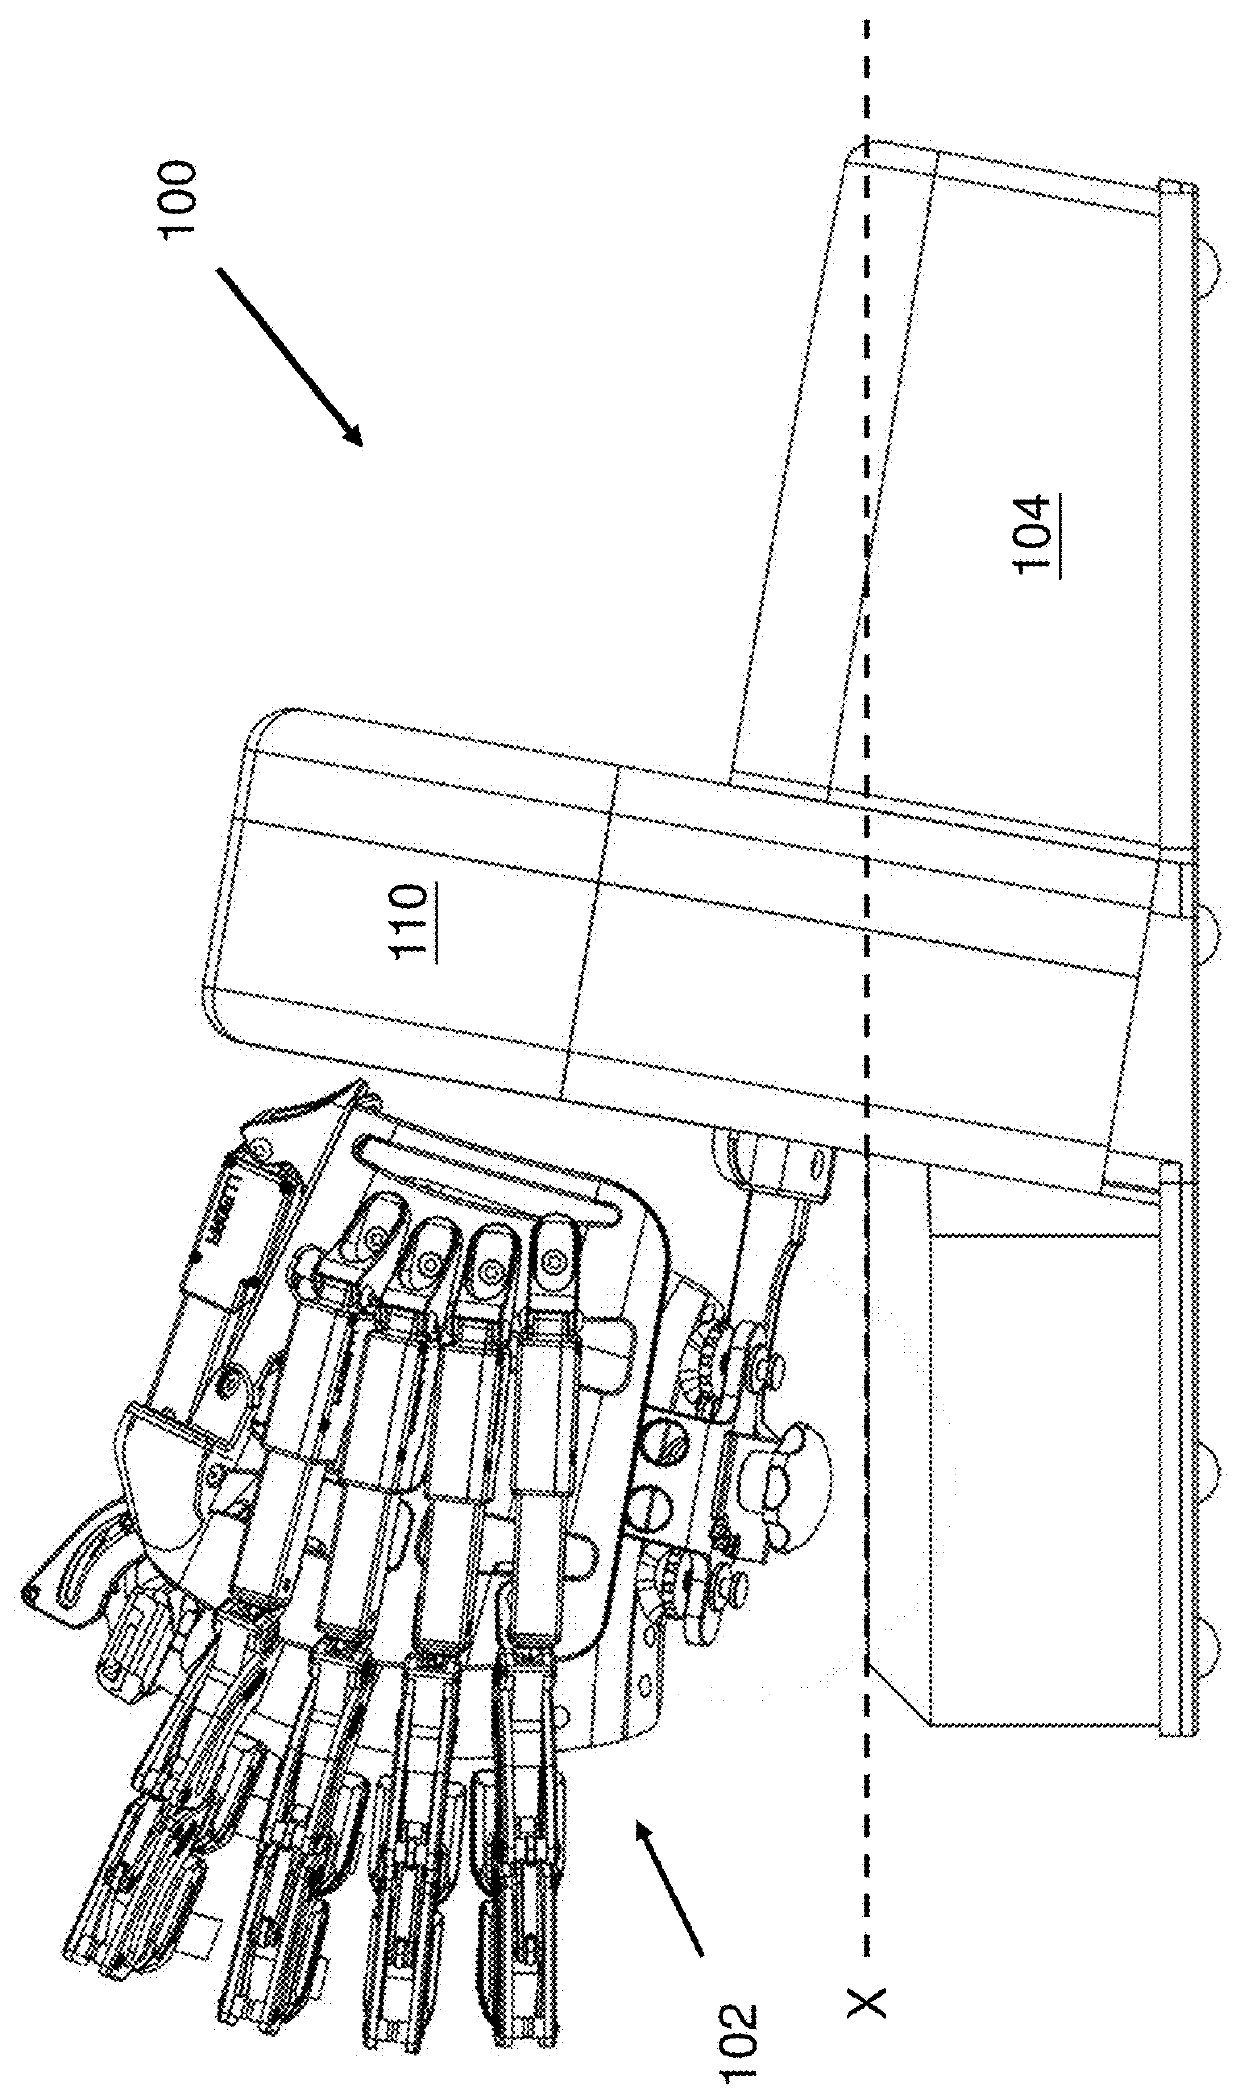 Power Assistive Device For Hand Rehabilitation And A Method of Using The Same